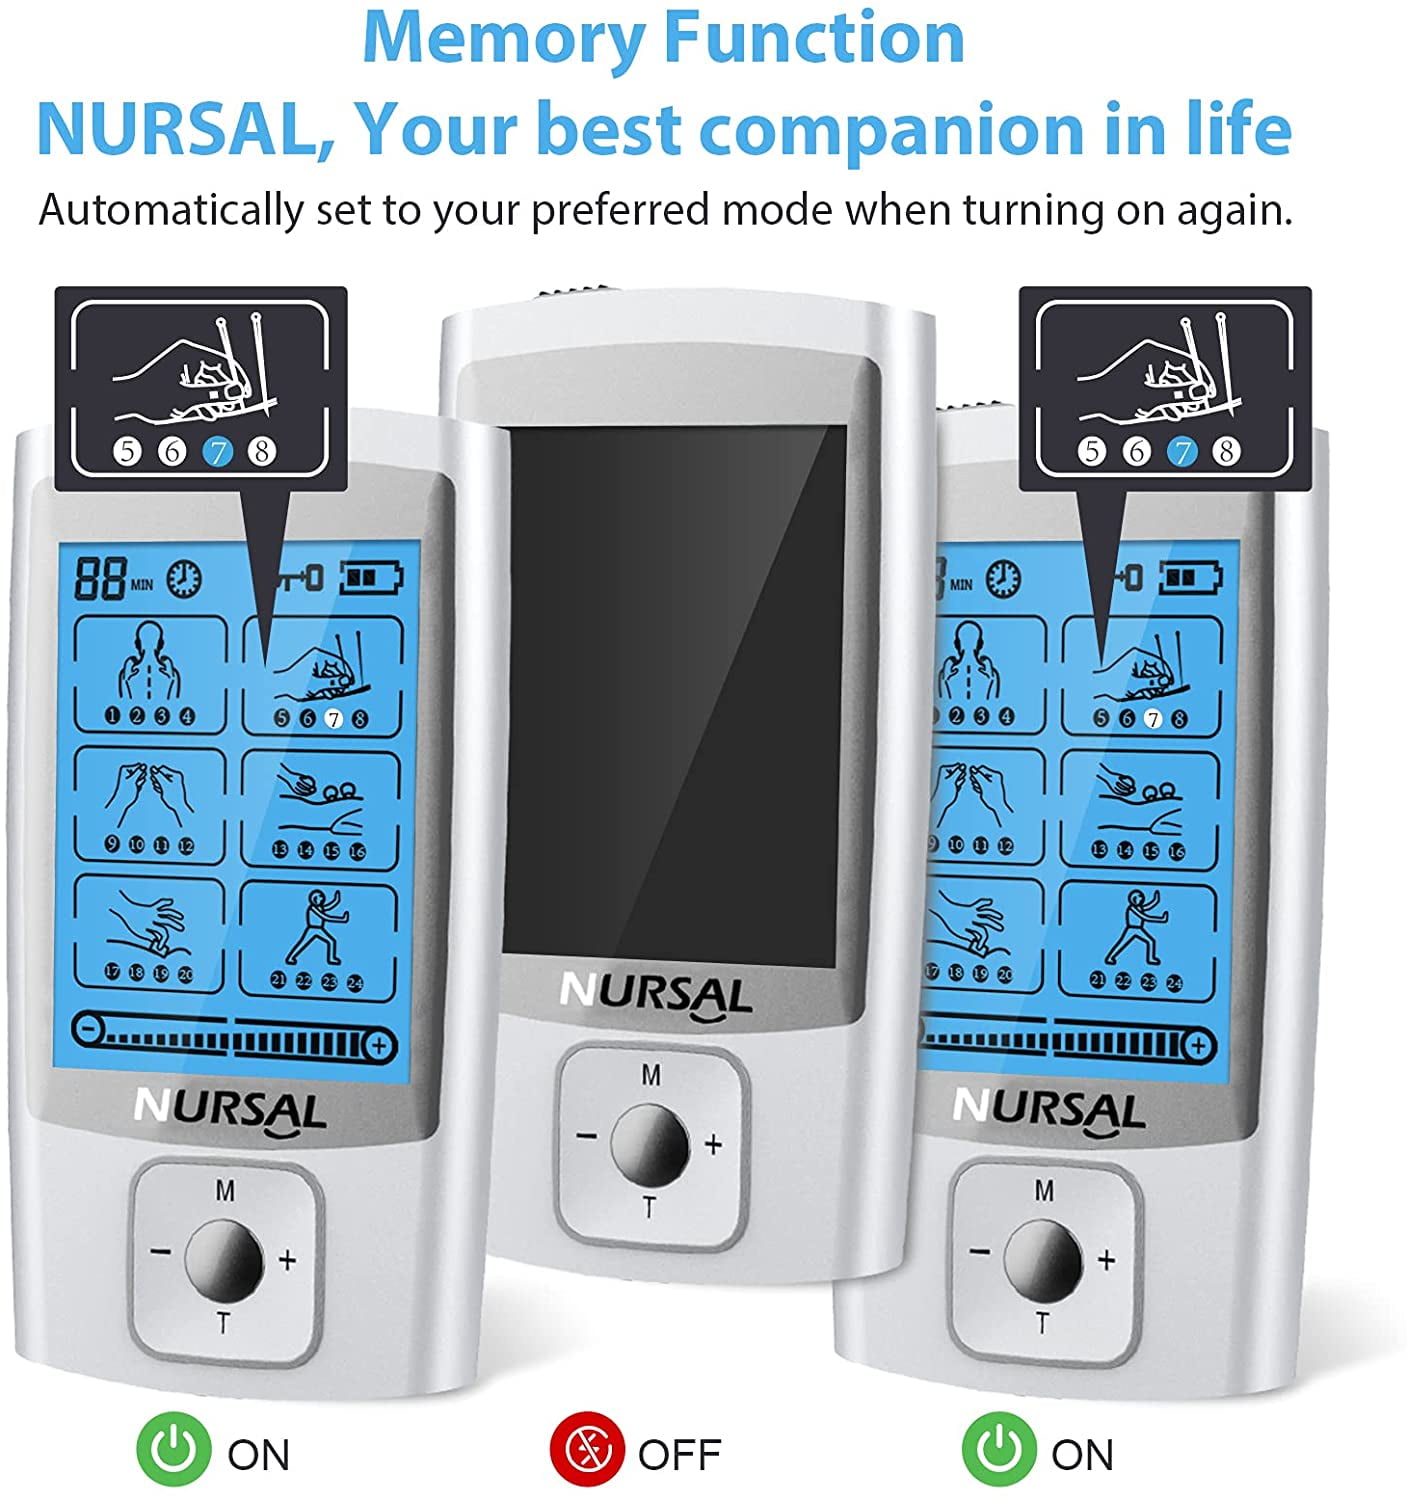 NURSAL Dual Channel TENS Unit Muscle Stimulator for Pain Relief Therapy  with 16 Pads & 24 Modes, Touchscreen TENS EMS Unit with Back Clip, Easy to